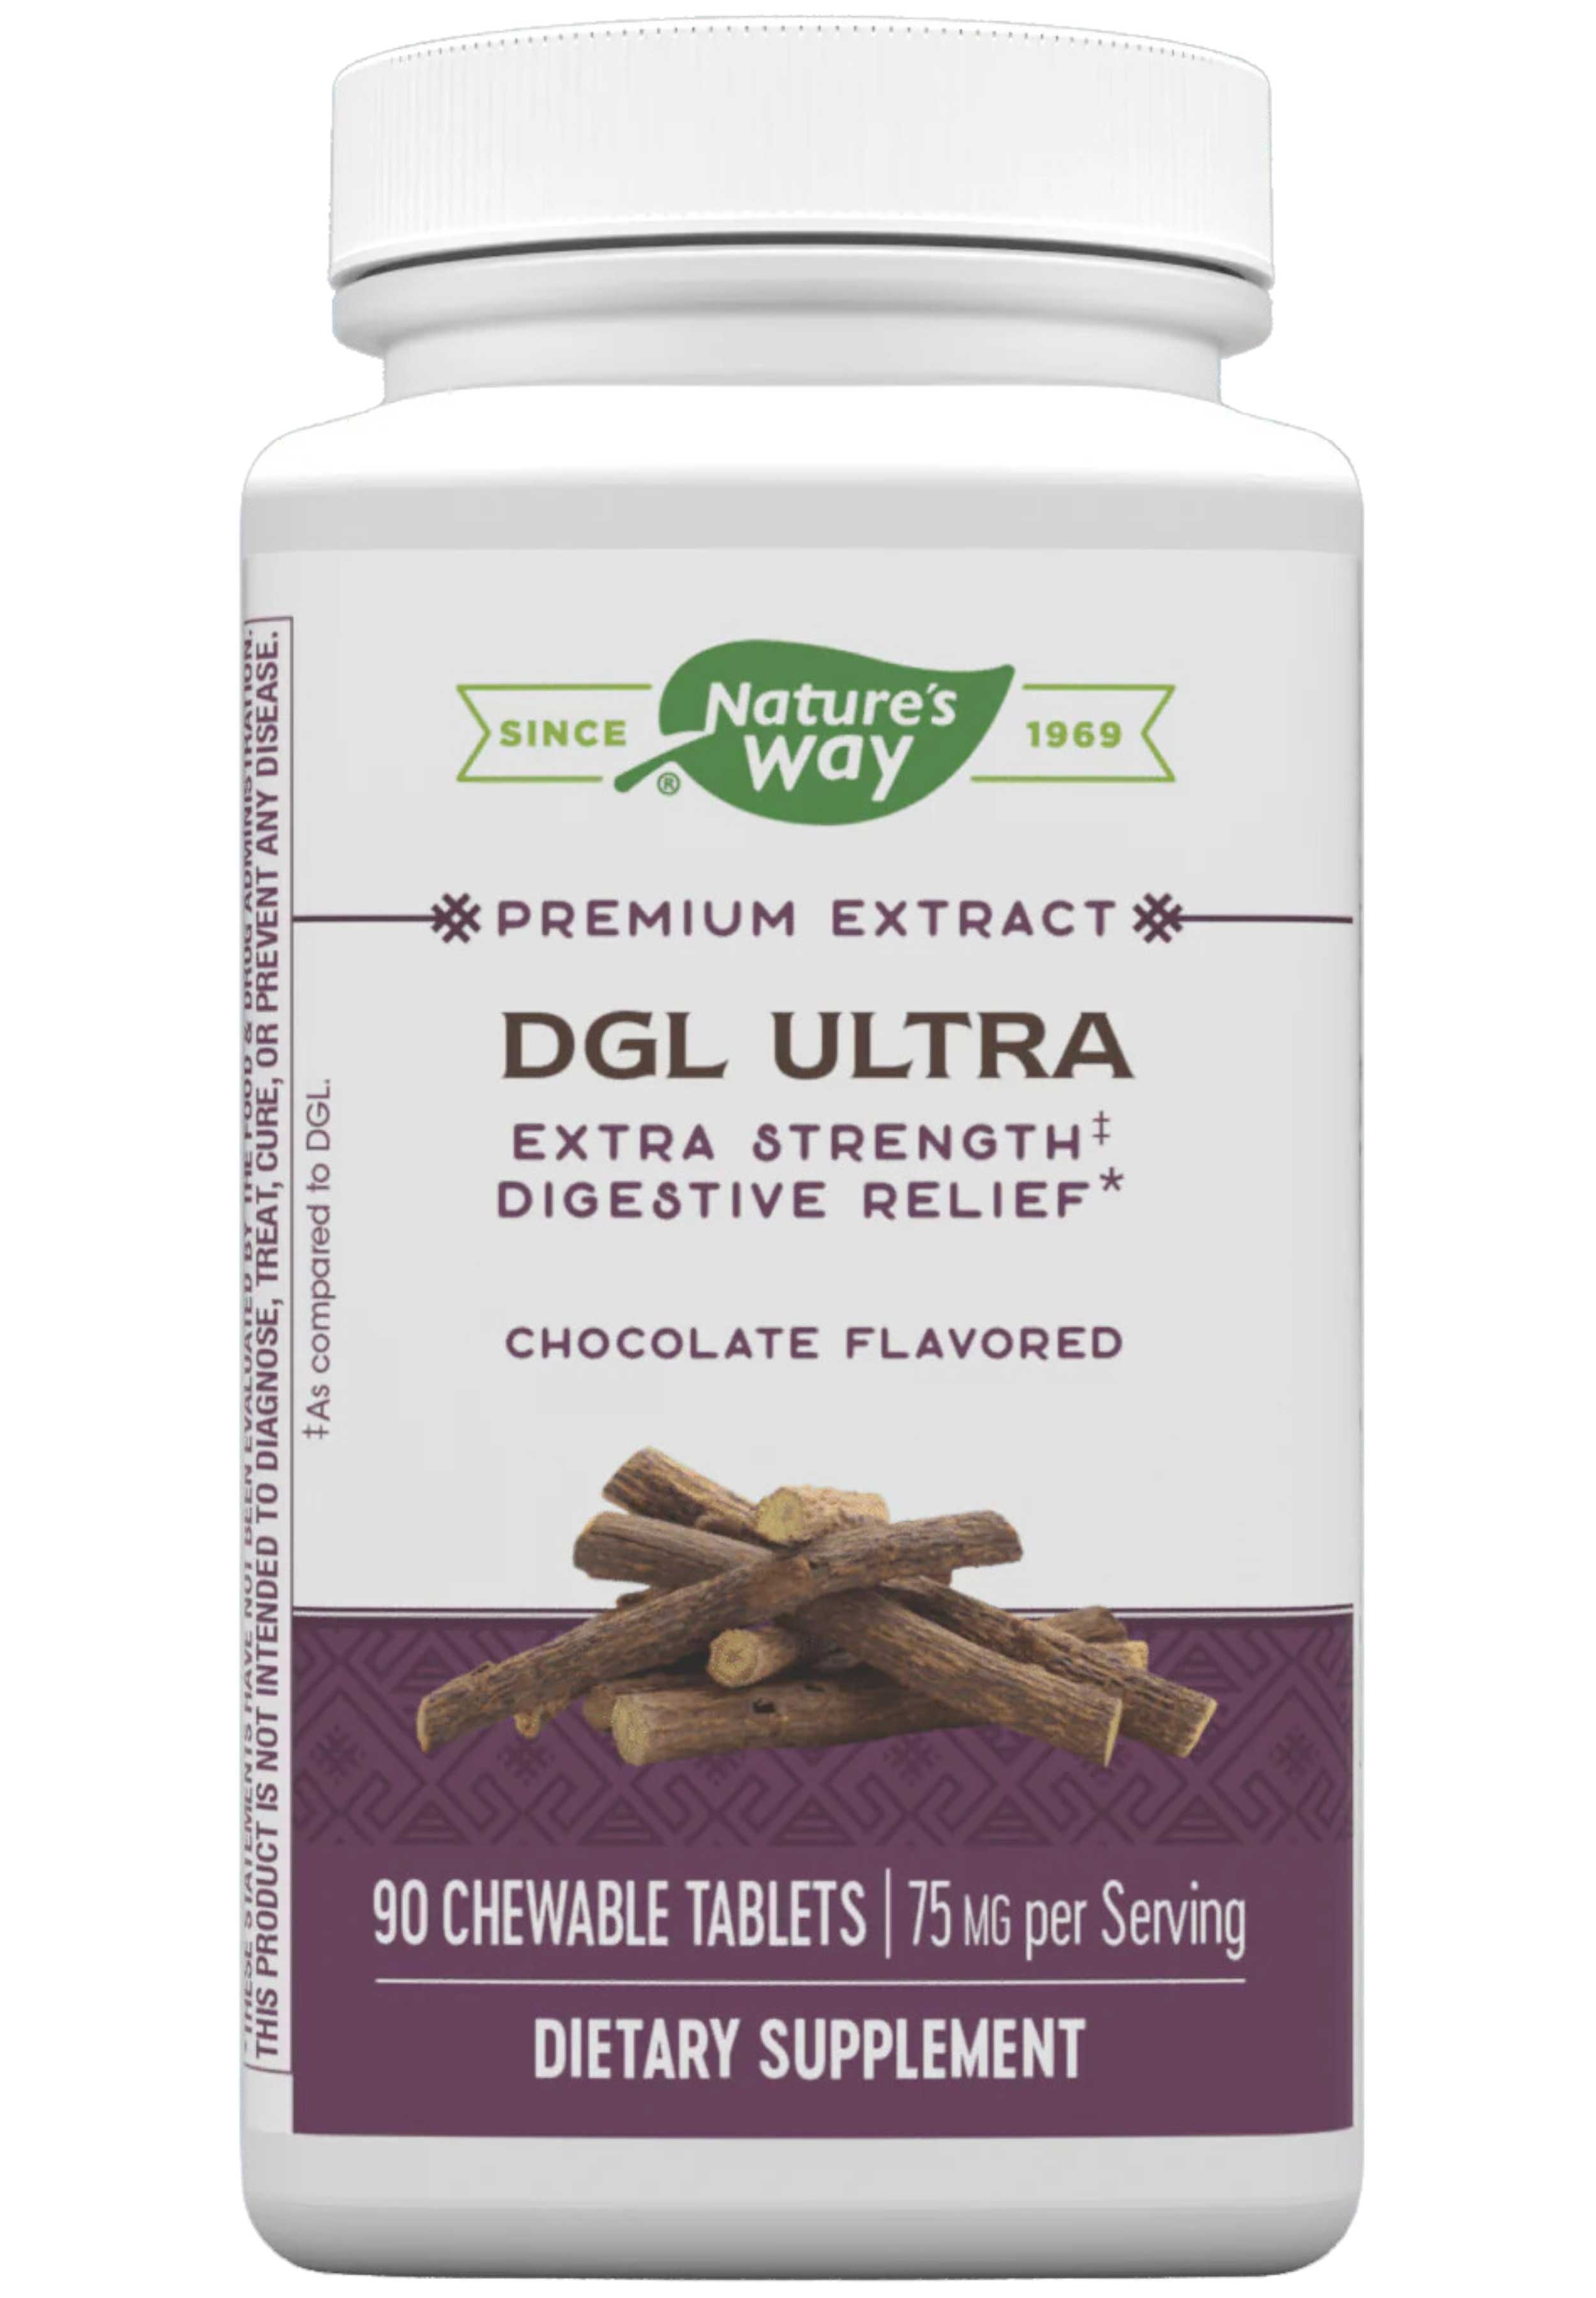 Nature's Way DGL Ultra (Chocolate Flavored)